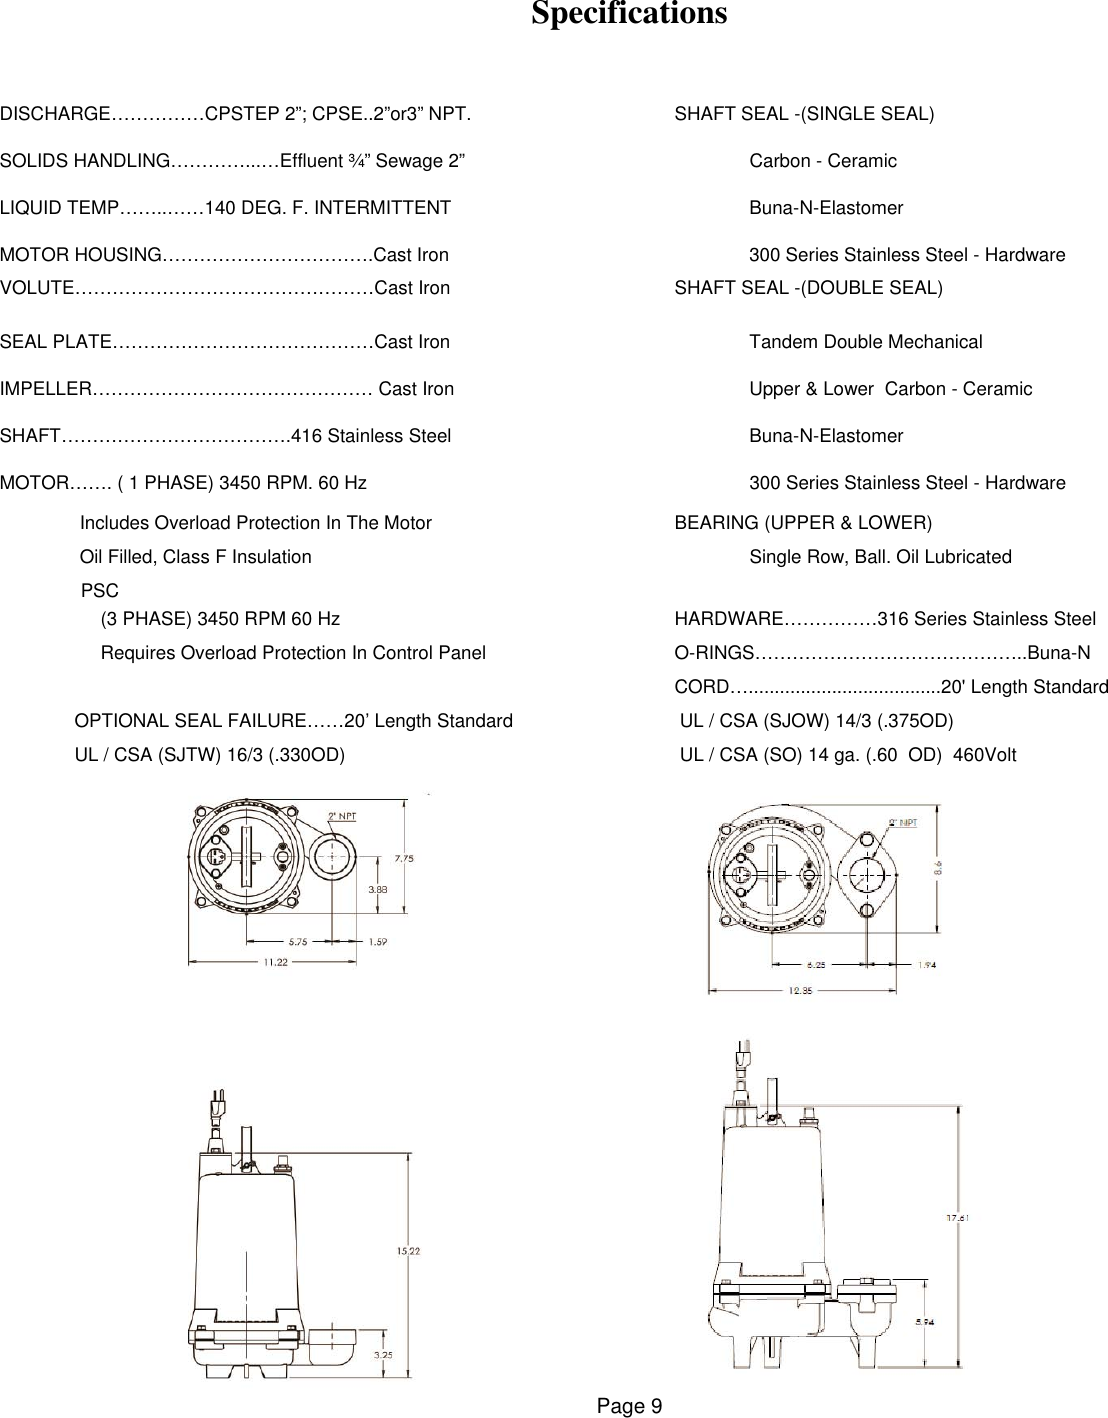 Page 9 of 11 - Champion-Pumps Champion-Pumps-Cpse-Pump-Users-Manual HH Manual Revised 112012